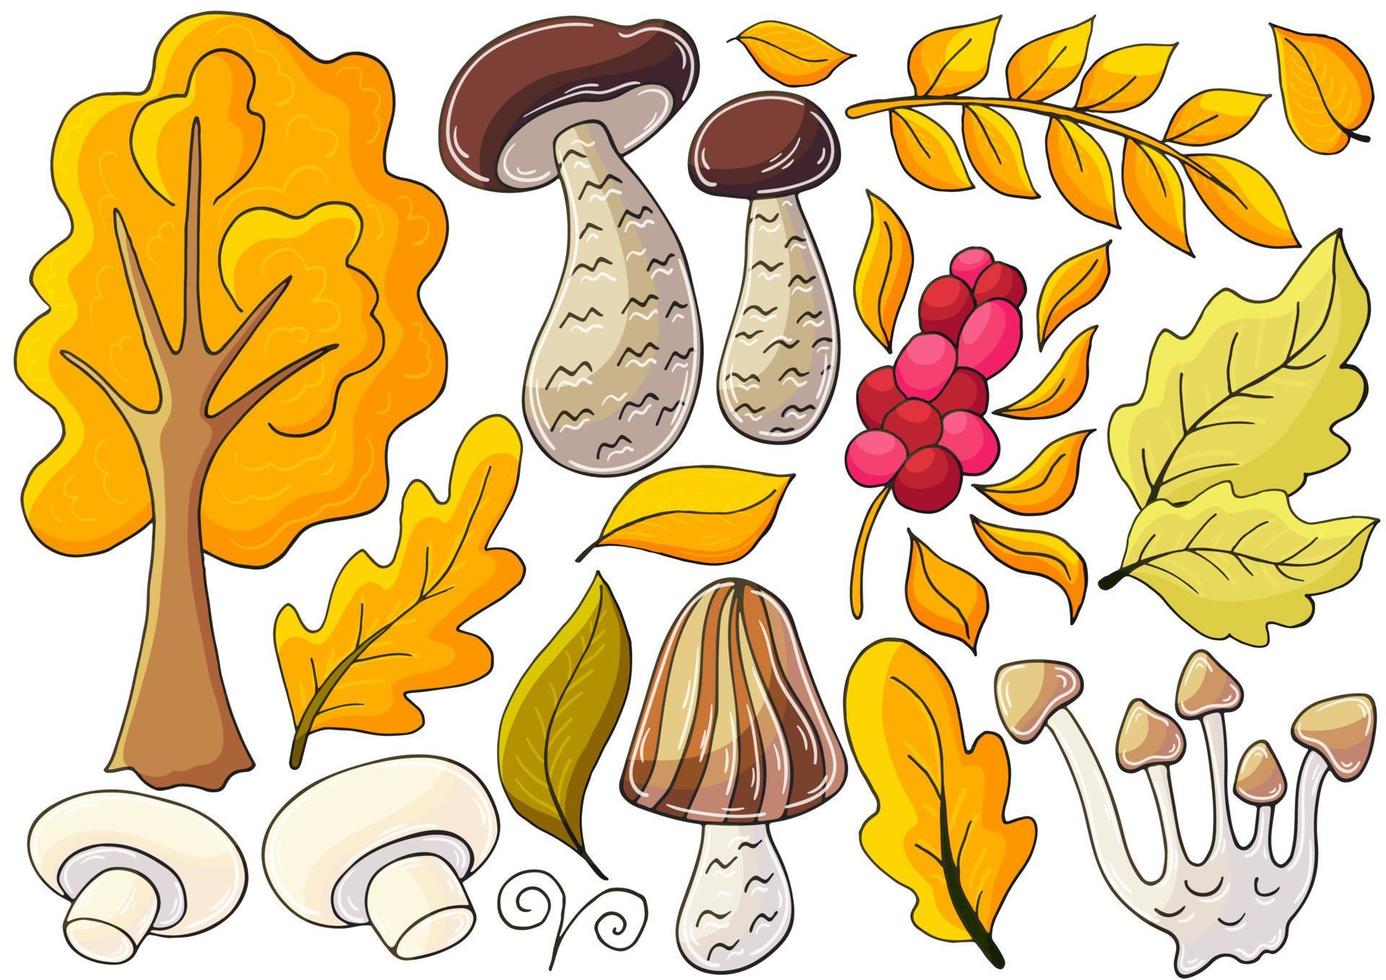 Autumn illustration in hand drawn style. Children's drawing vector